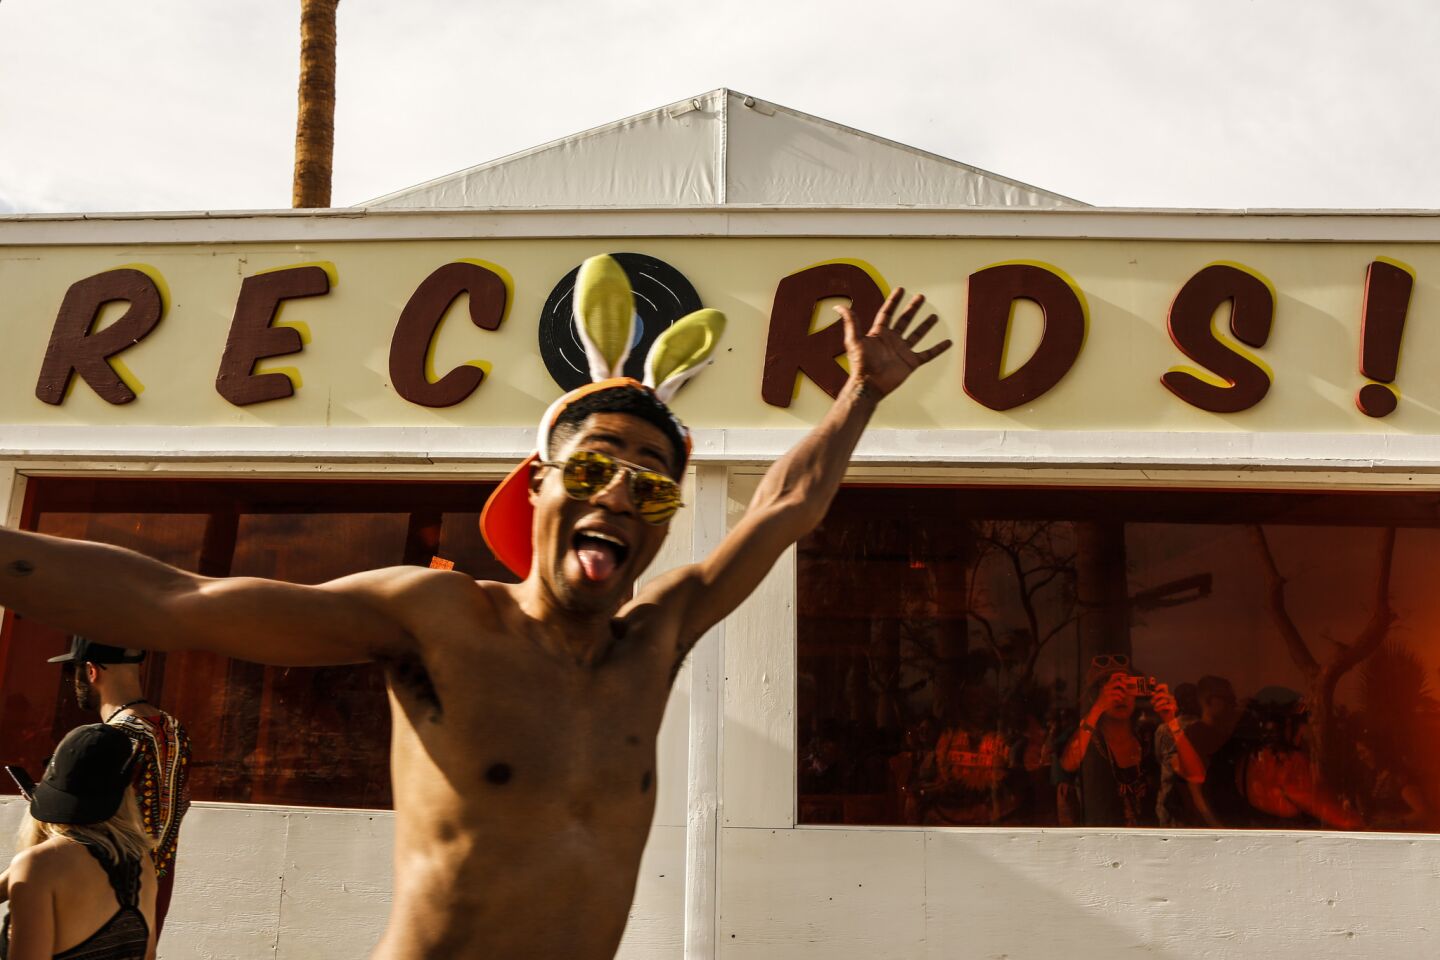 A festivalgoer poses at Coachella's record store on Saturday, which was also Record Store Day.